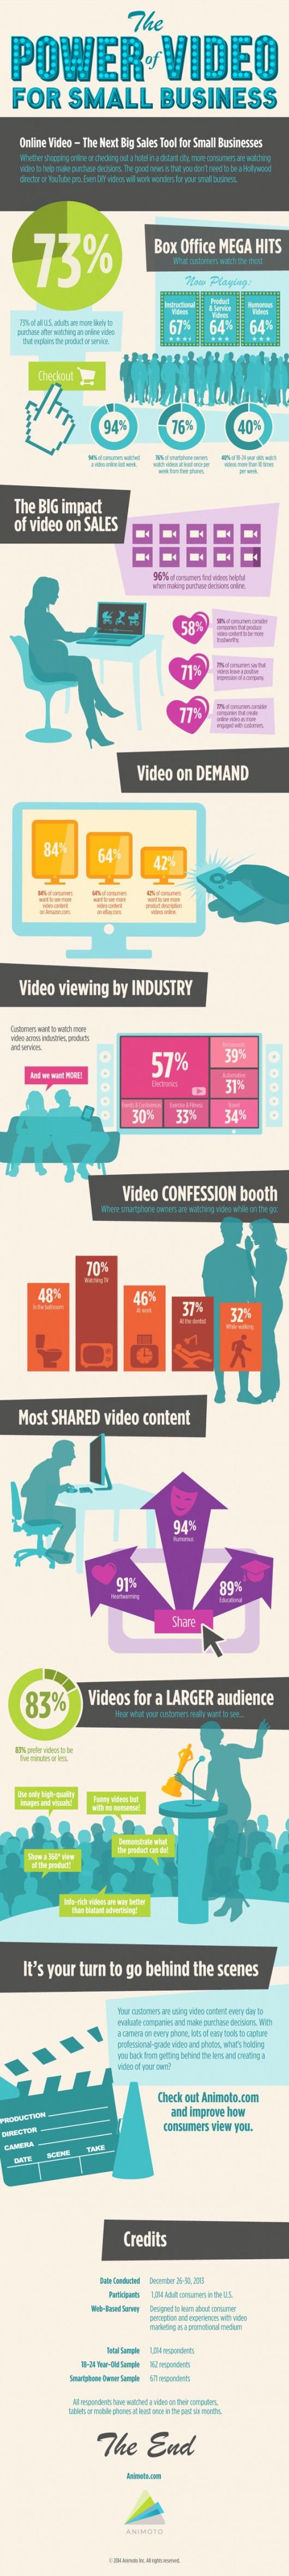 small-business-video-infographic